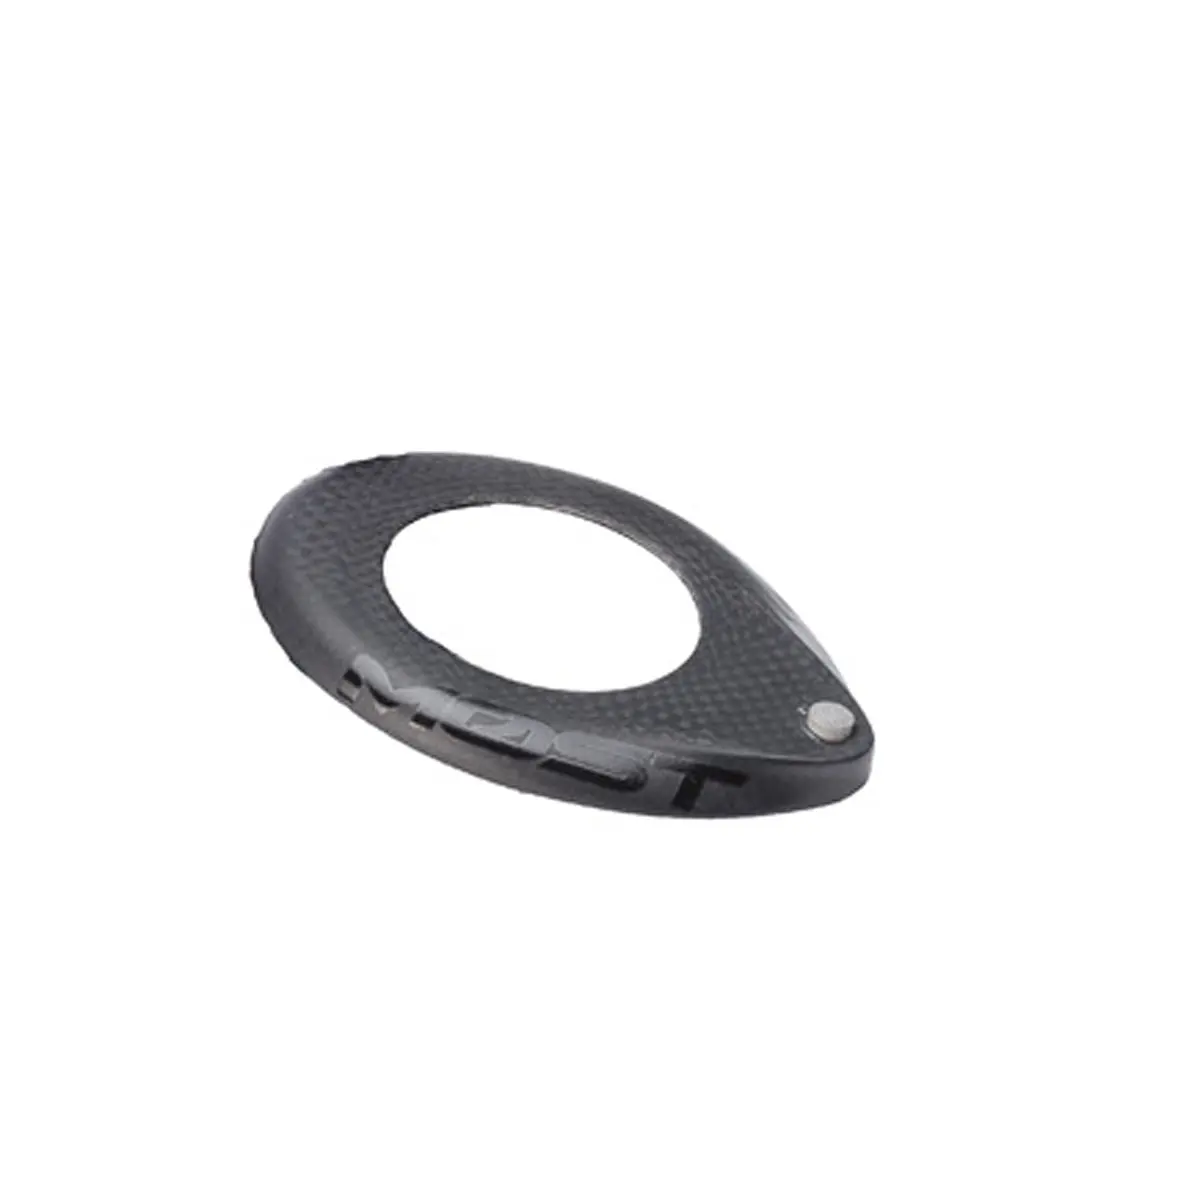 Most Aero 1K Carbon Headset Spacer